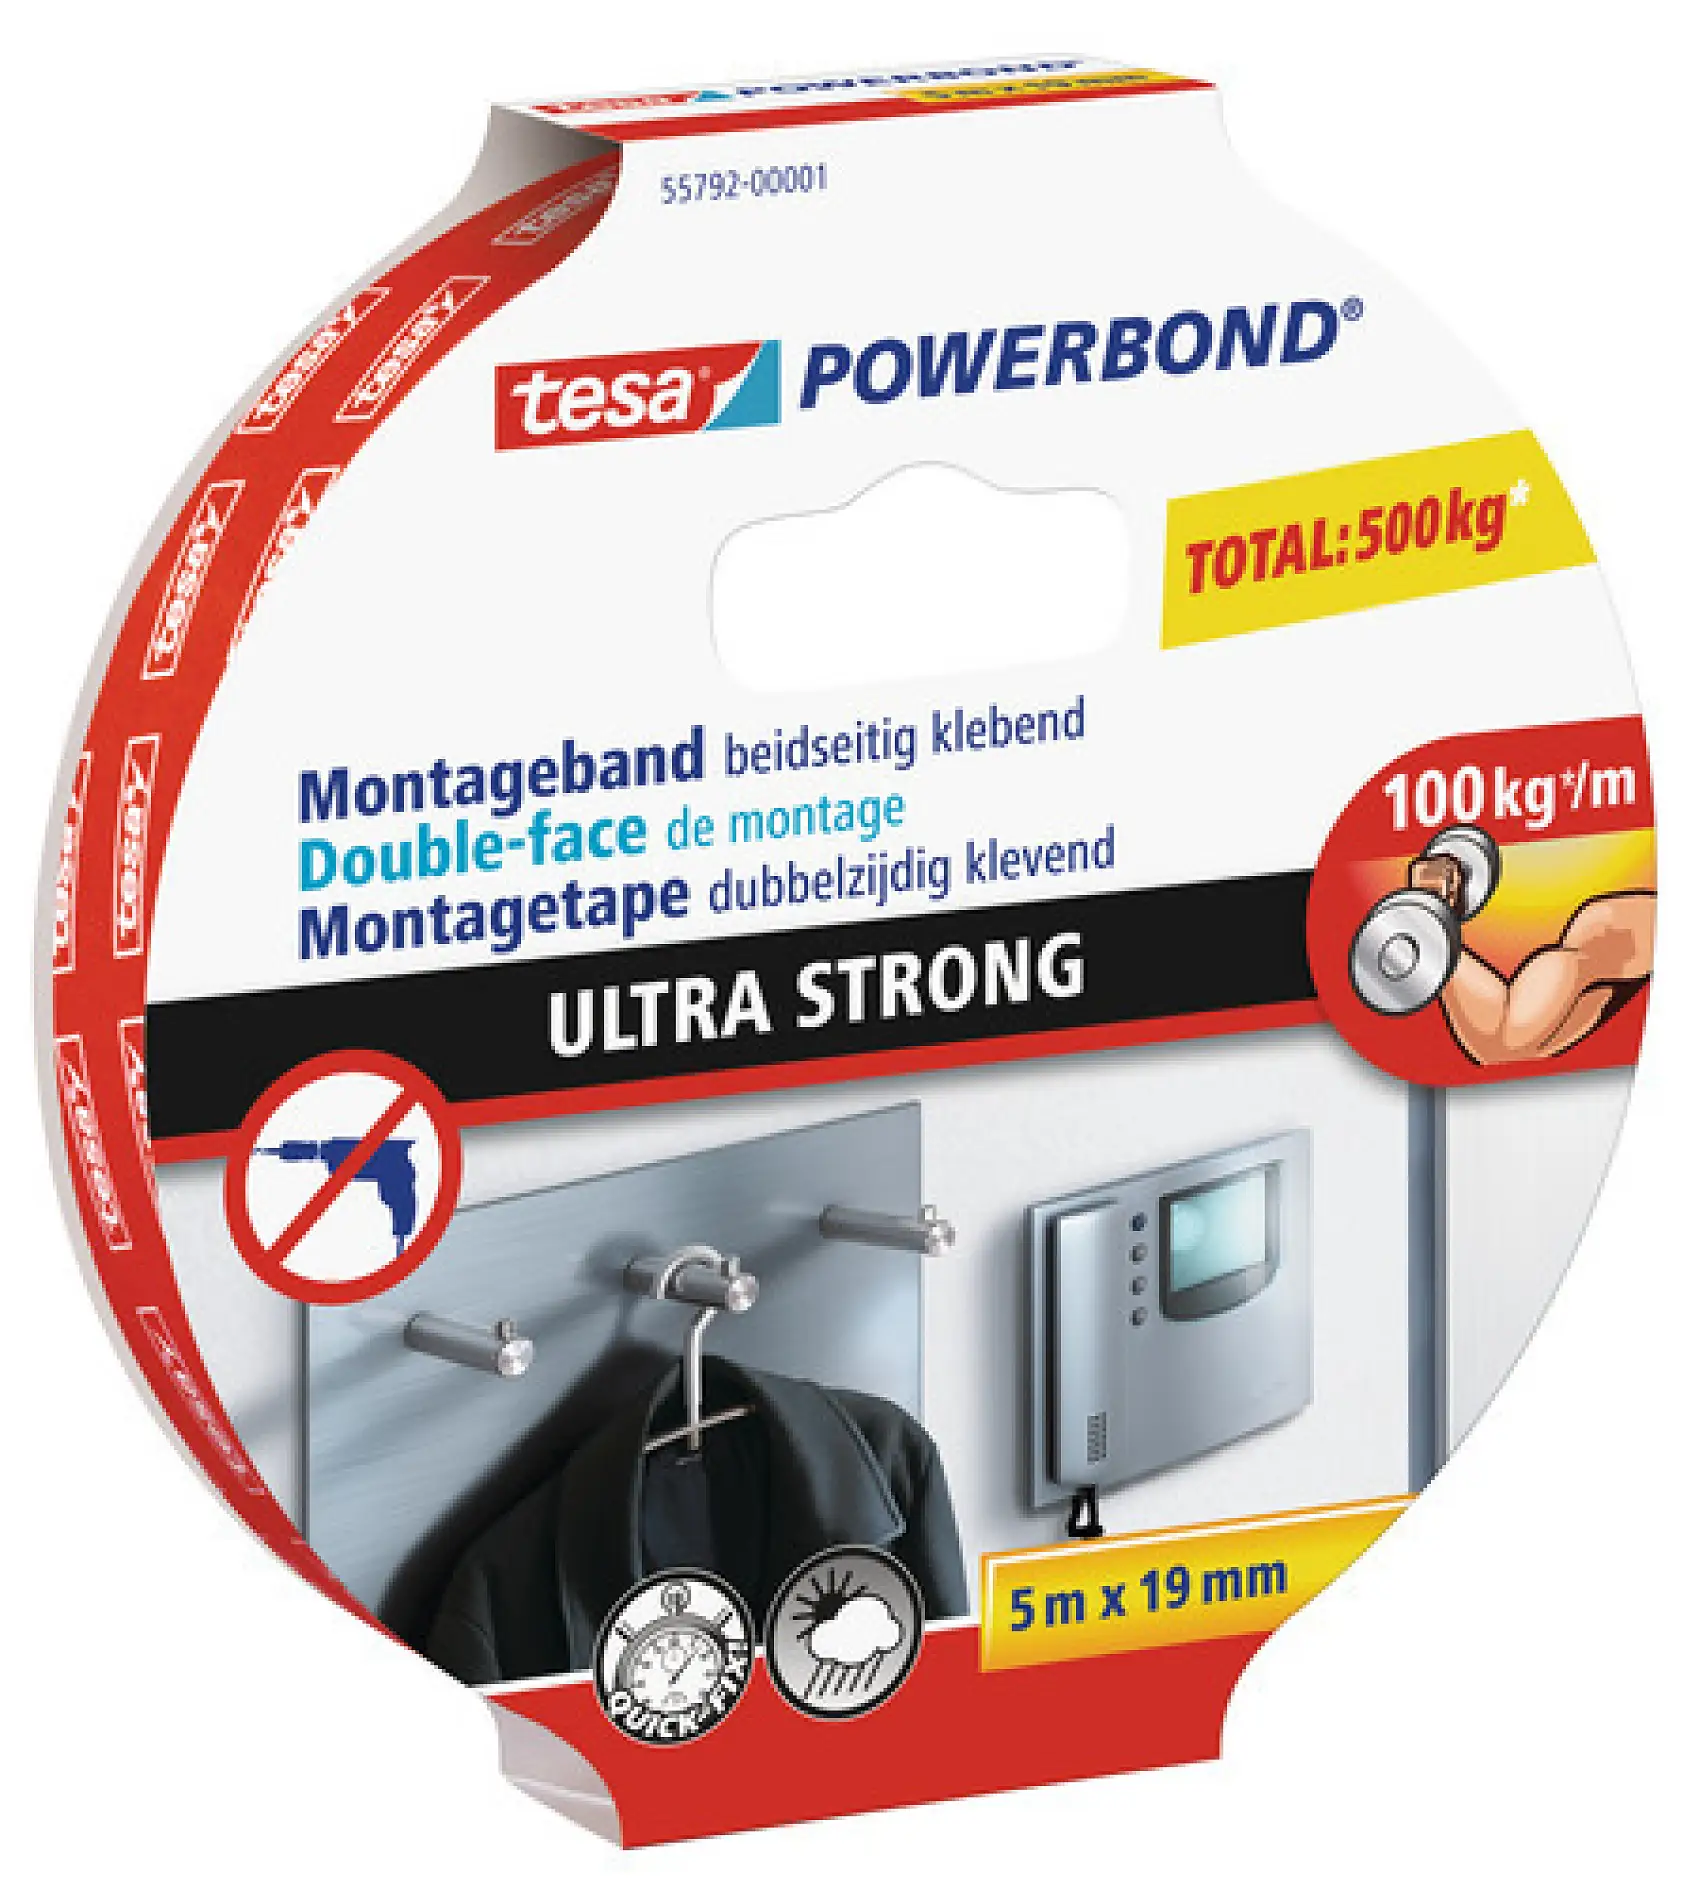 tesa® Powerbond Ultra Strong is the clever way to hang objects without using nails or screws. This double-sided mounting tape will stick to most smooth, firm surfaces. It’s the ideal mounting tape to use if you are hanging objects with a thickness of up to 10 mm and a weight of up to 6 kg. In ideal conditions, a strip of just 10 cm is enough to hold a weight of up to 10 kg.